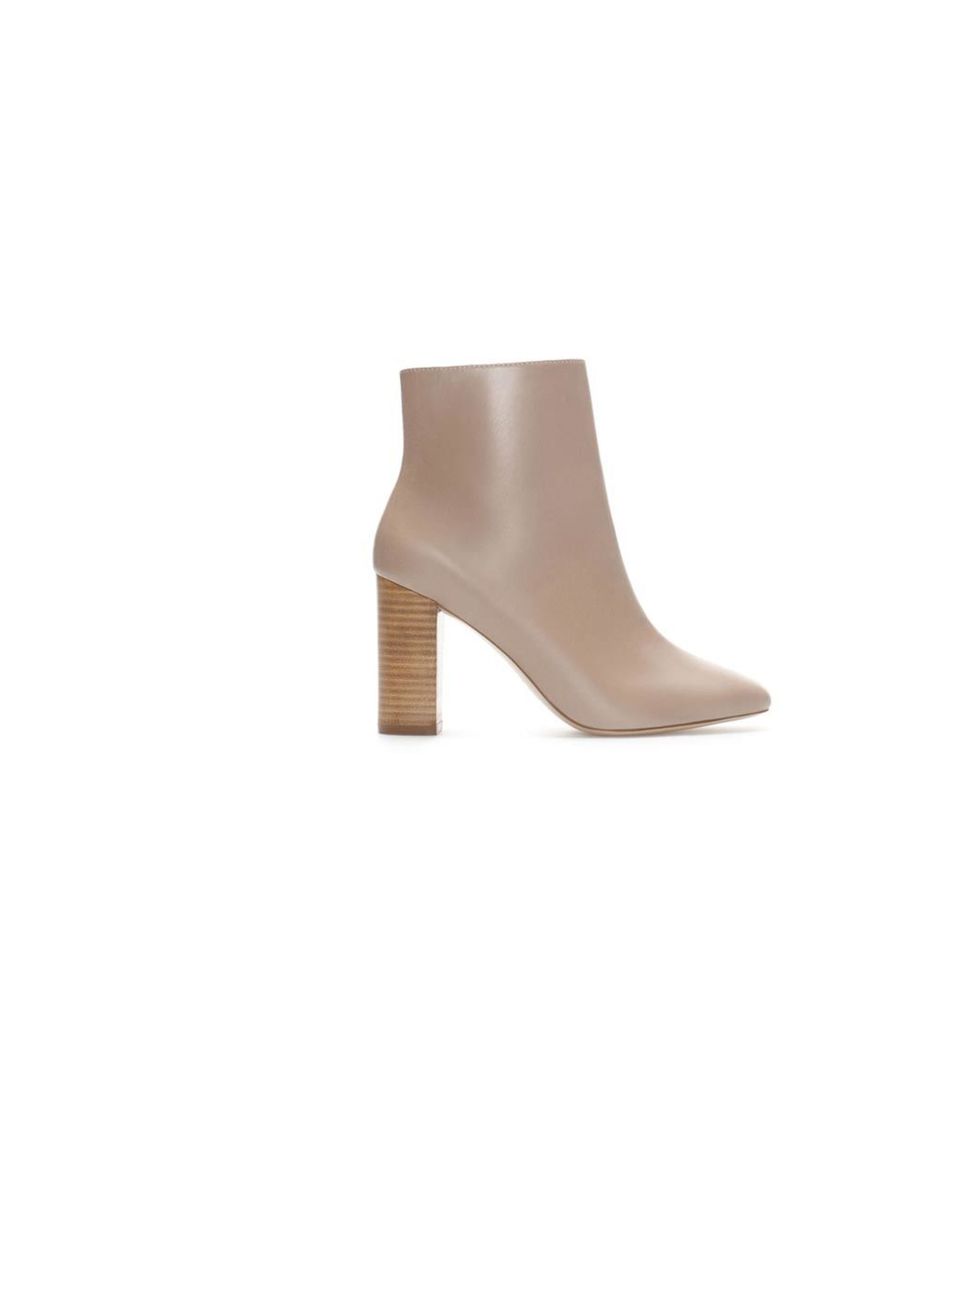 <p>Say more with less with <a href="http://www.zara.com/uk/en/woman/shoes/ankle-boots/leather-ankle-boot-with-contrasting-heel-c288001p1403651.html">Zara</a>'s nearly naked shoes for understated off-duty chic, £79.99</p>